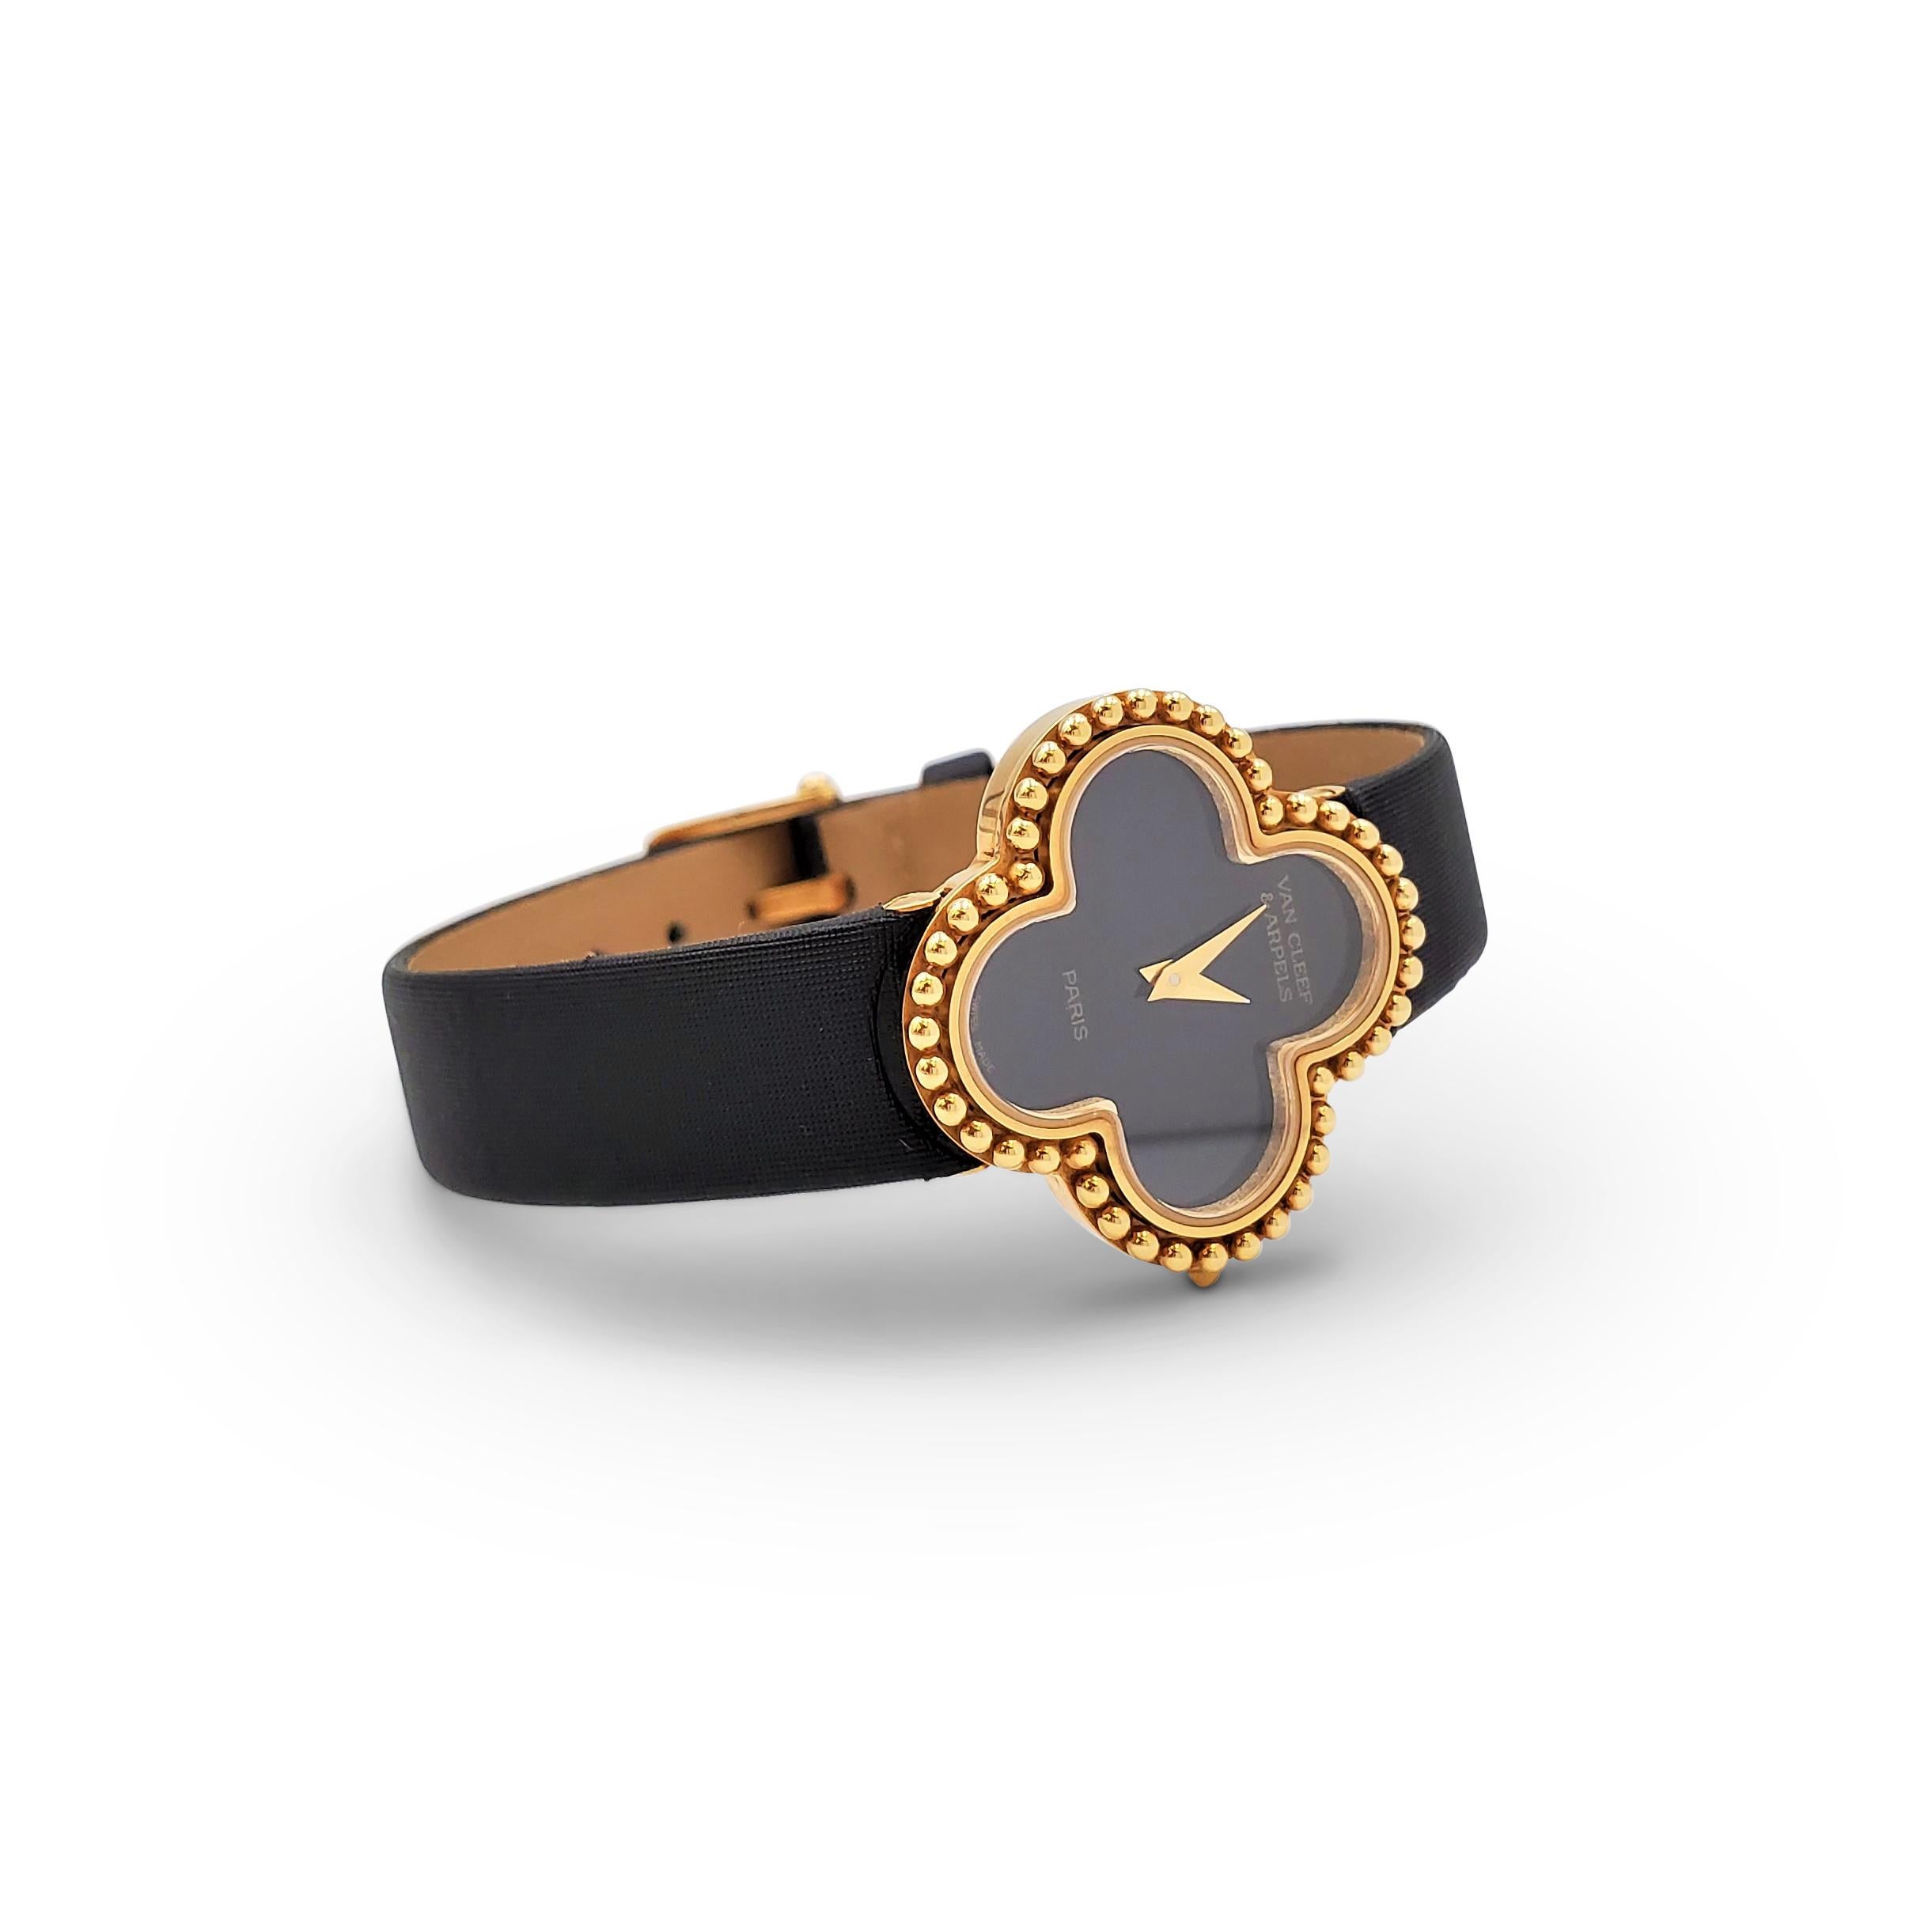 Authentic Van Cleef & Arpels 'Alhambra' watch. Centering on the classic clover motif, the watch bezel and case (26mm x 26mm) are crafted in 18 karat yellow gold. A chic black onyx dial features gold-toned sword-shaped hands and signed Van Cleef &